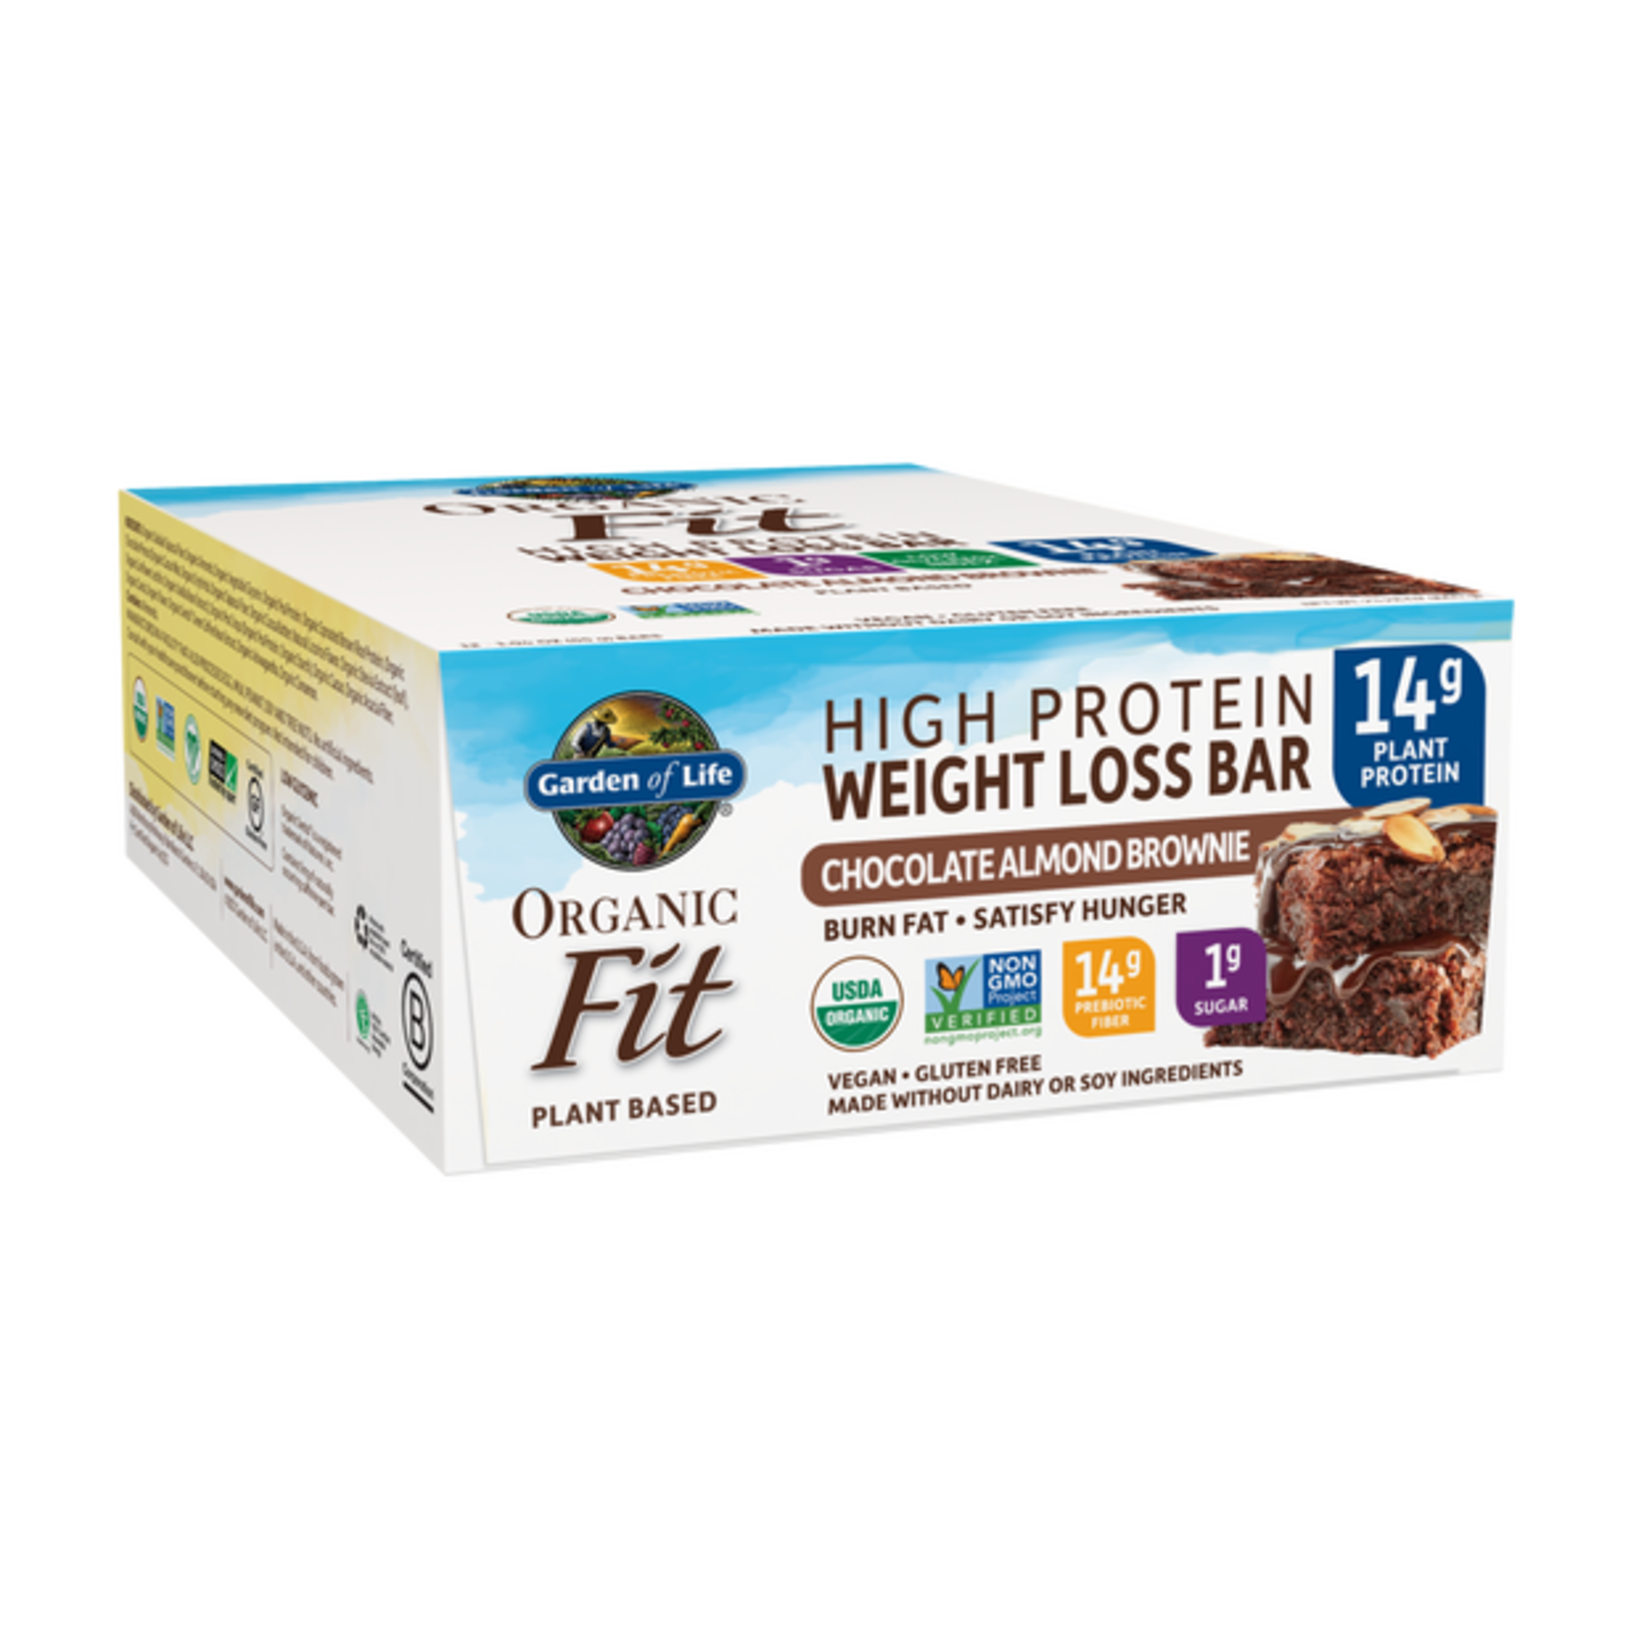 Garden of Life Garden of Life - Box of Organic Fit Weight Loss Bar Chocolate Almond Brownie - 12 Bars